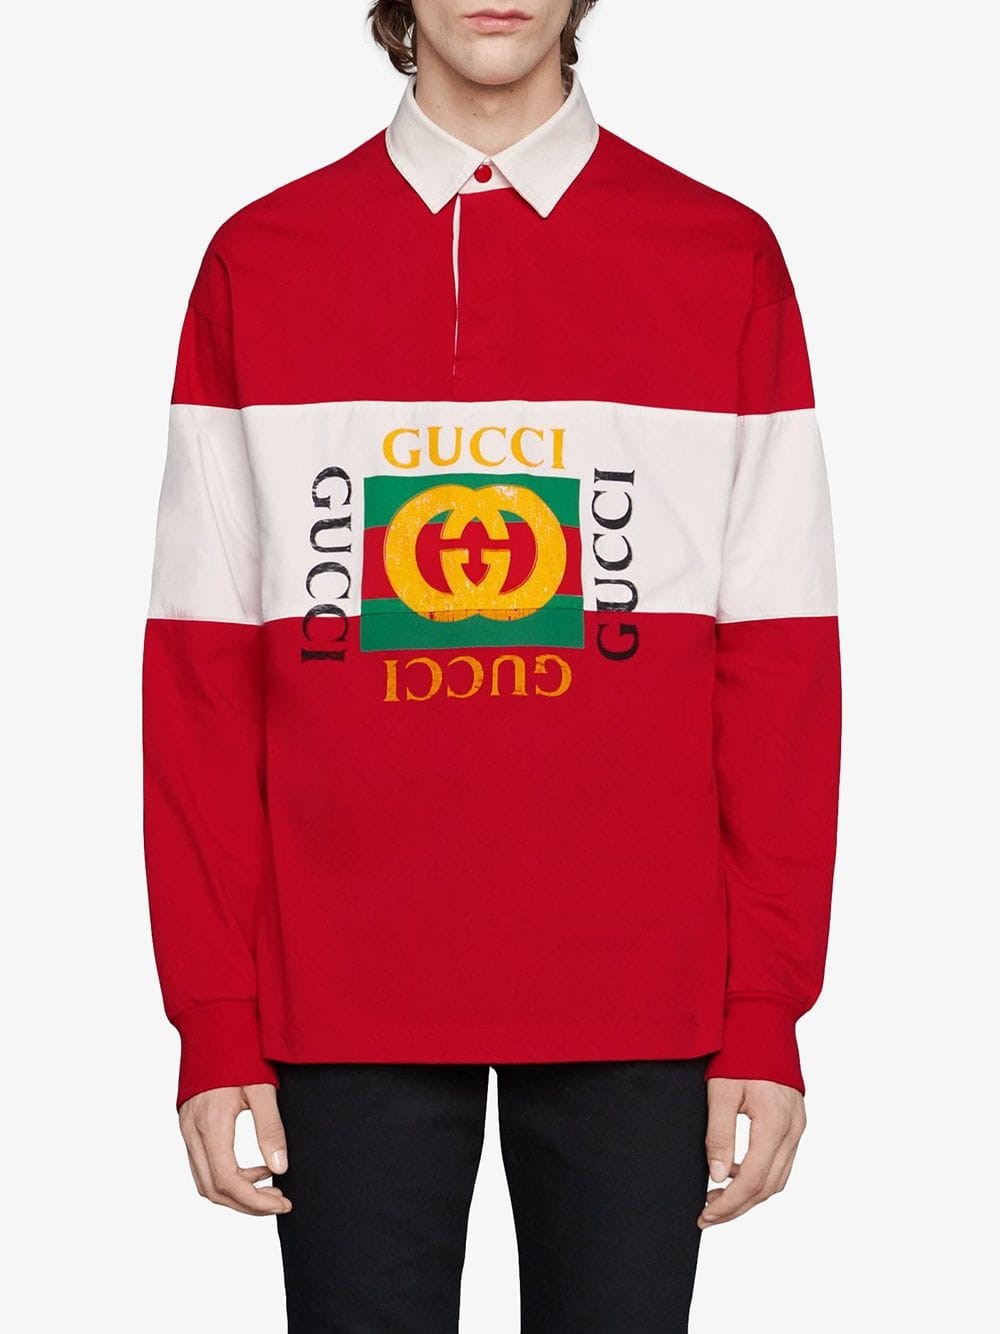 gucci LONG SLEEVE POLO available montiboutique.com - 26969